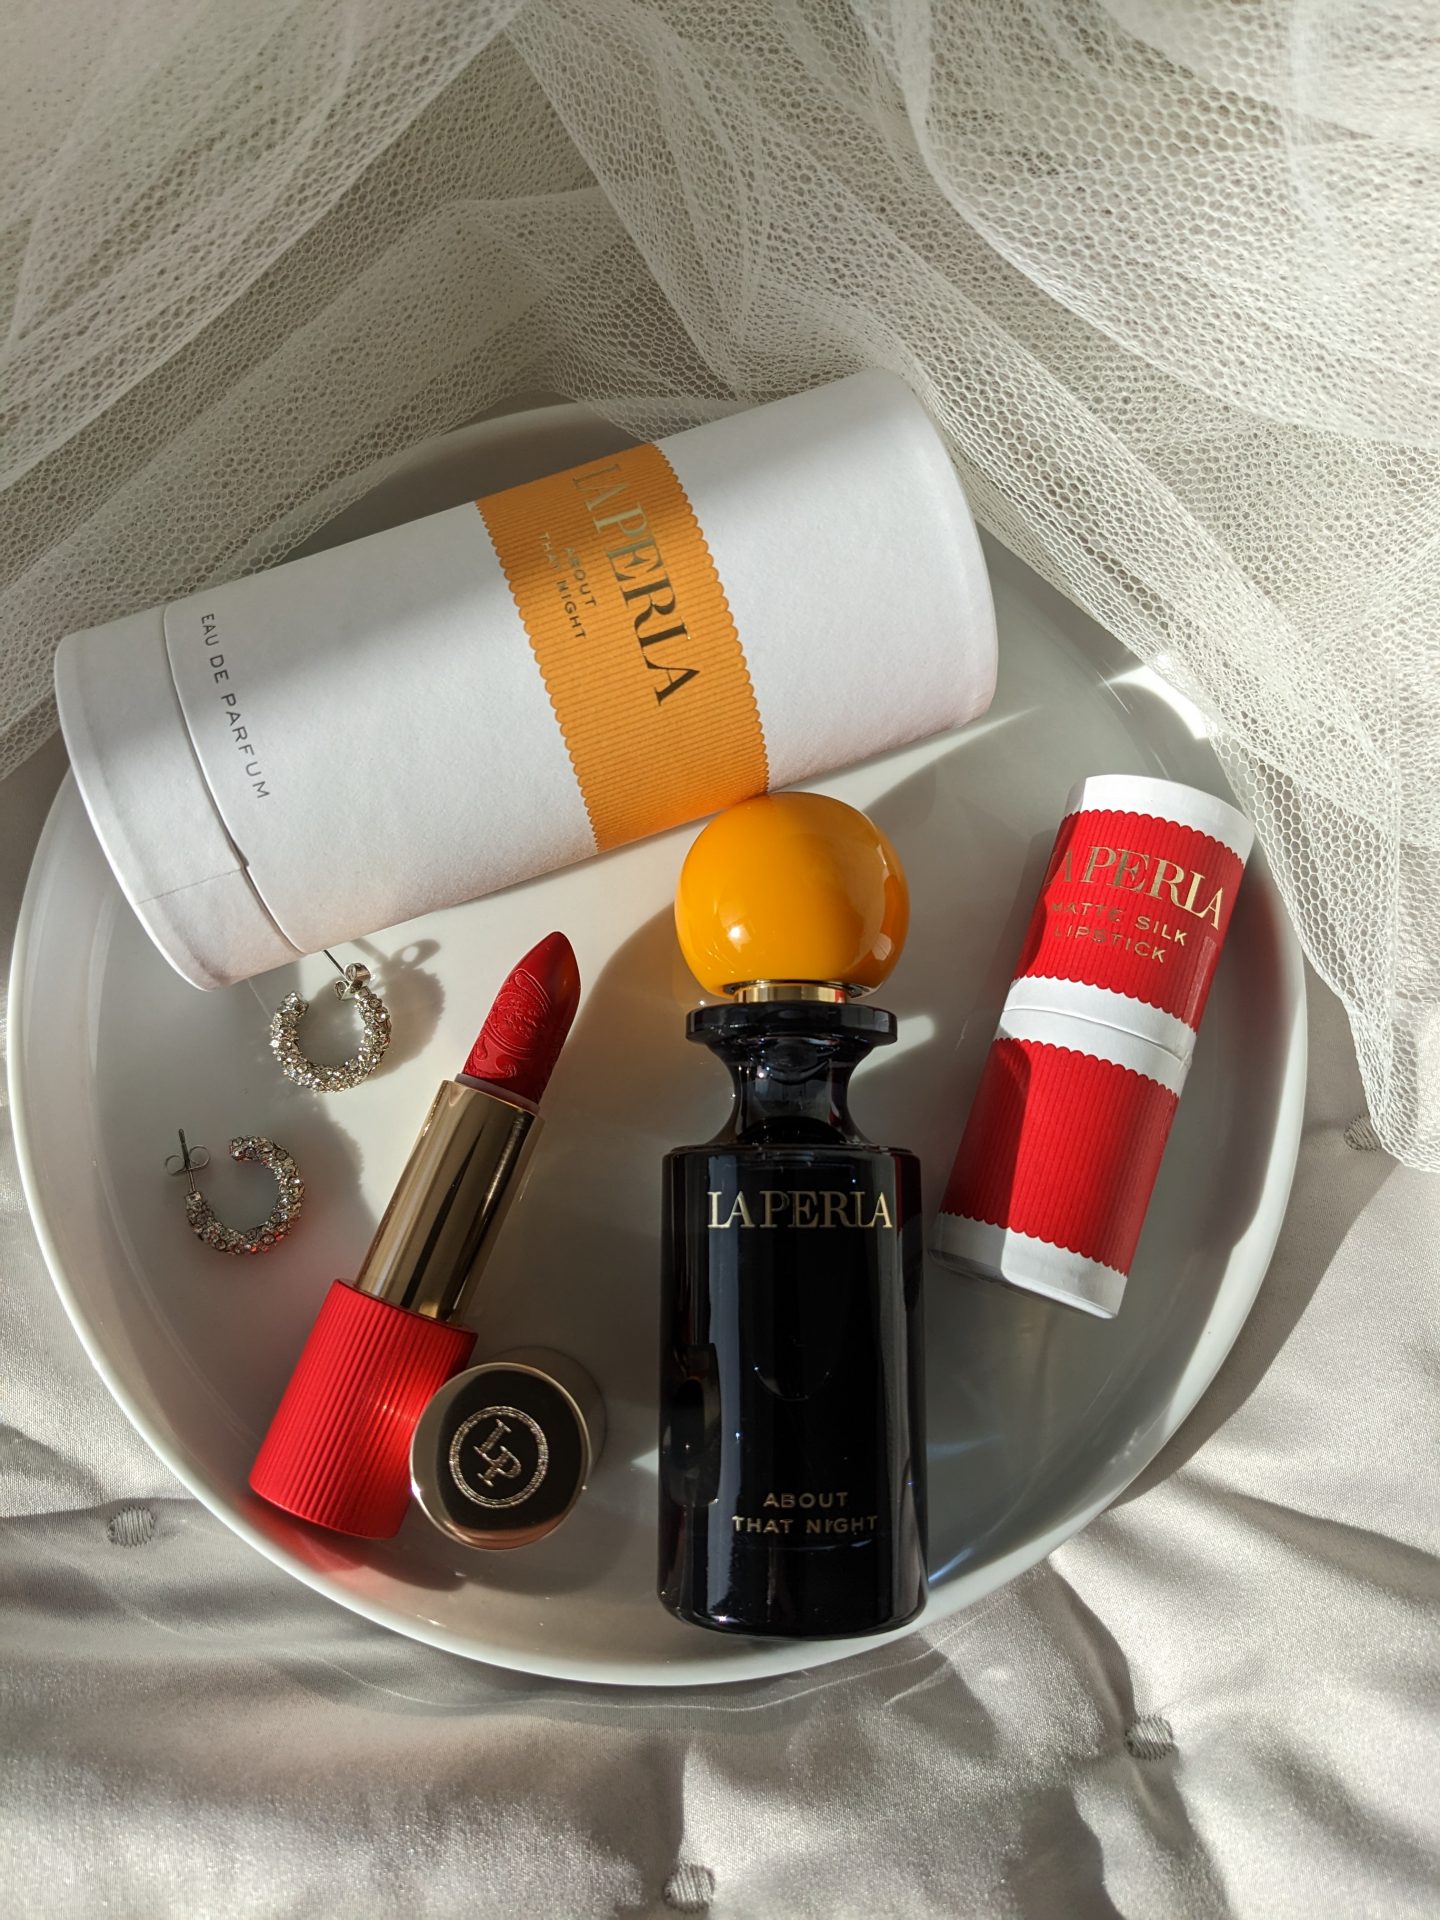 La Perla About That Night Fragrance & Venetian Red Lipstick Review